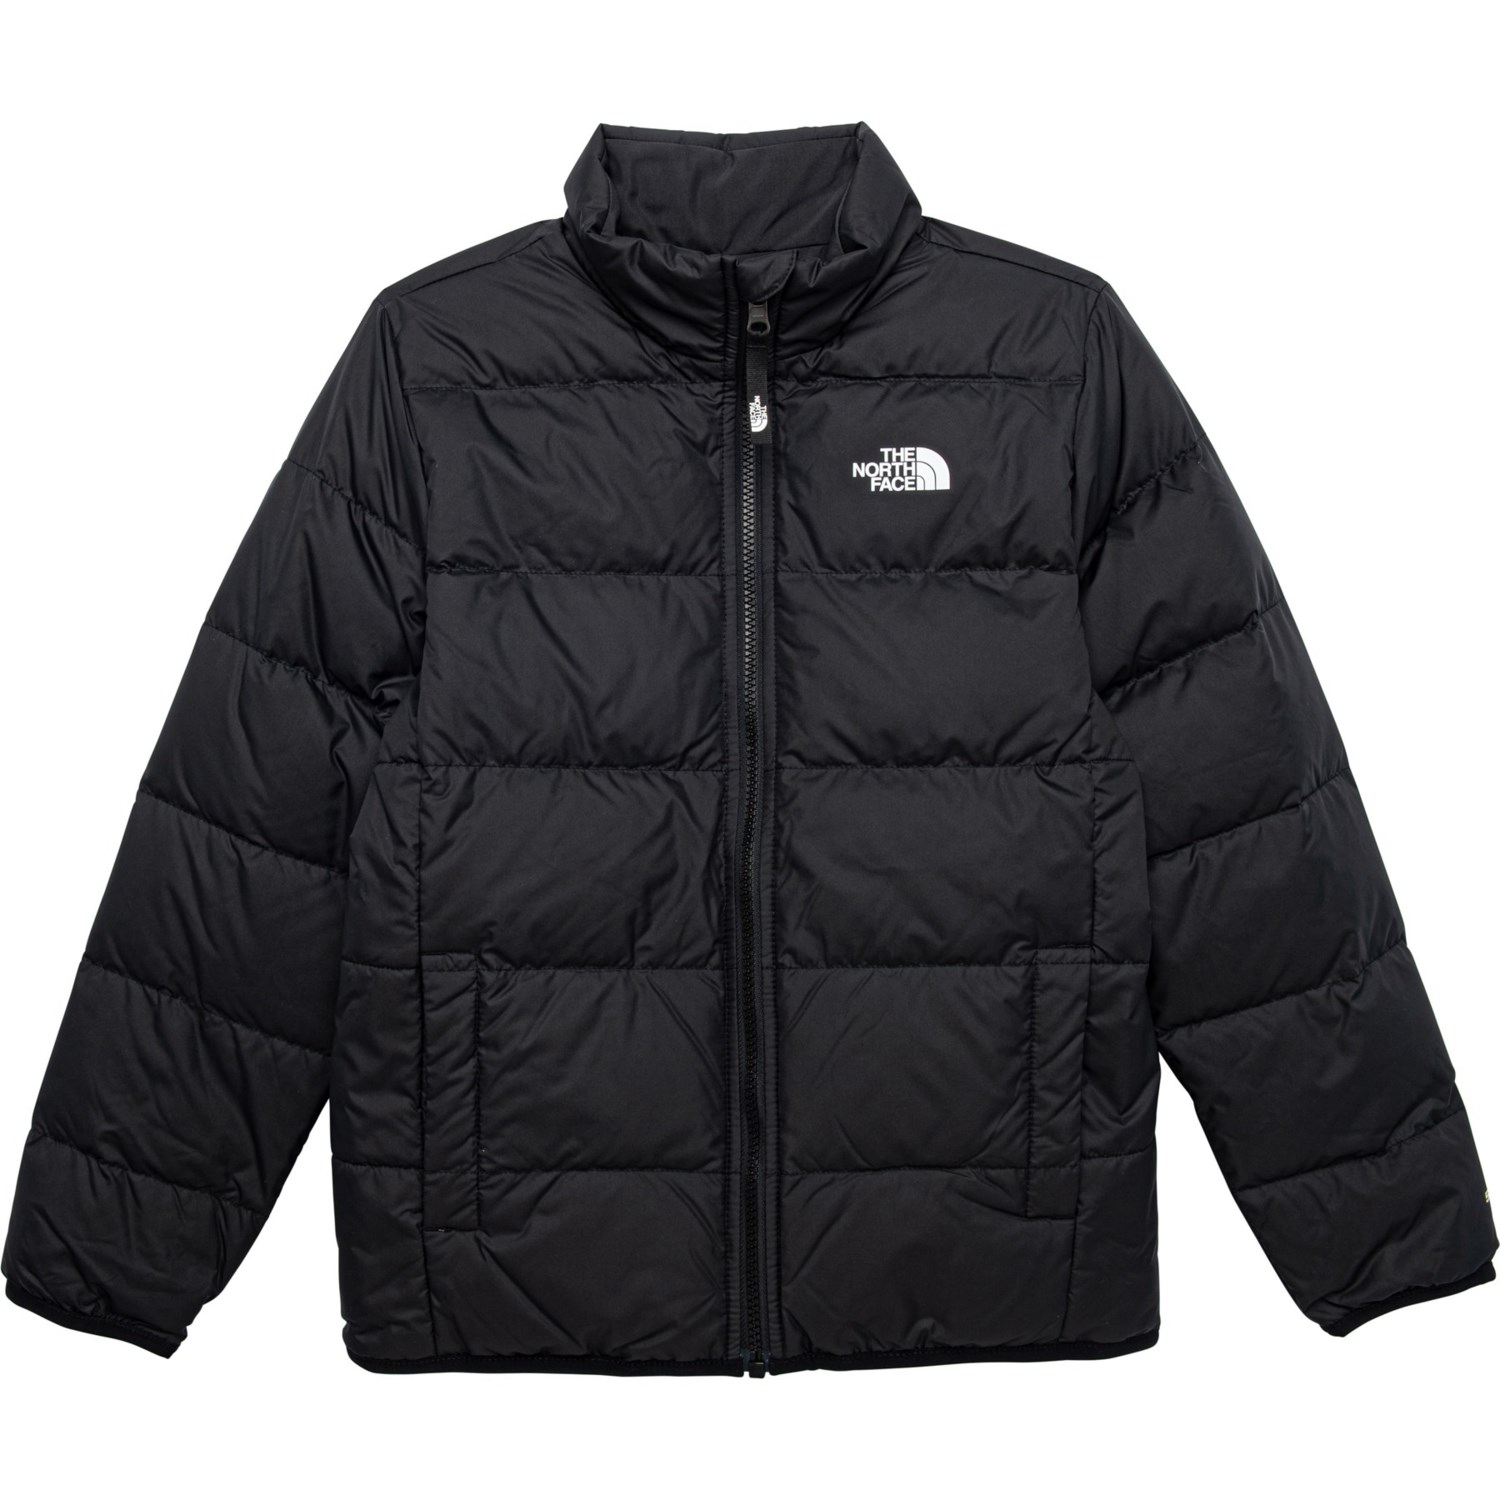 The North Face Boys Andes Jacket - Reversible, 550 Fill Power